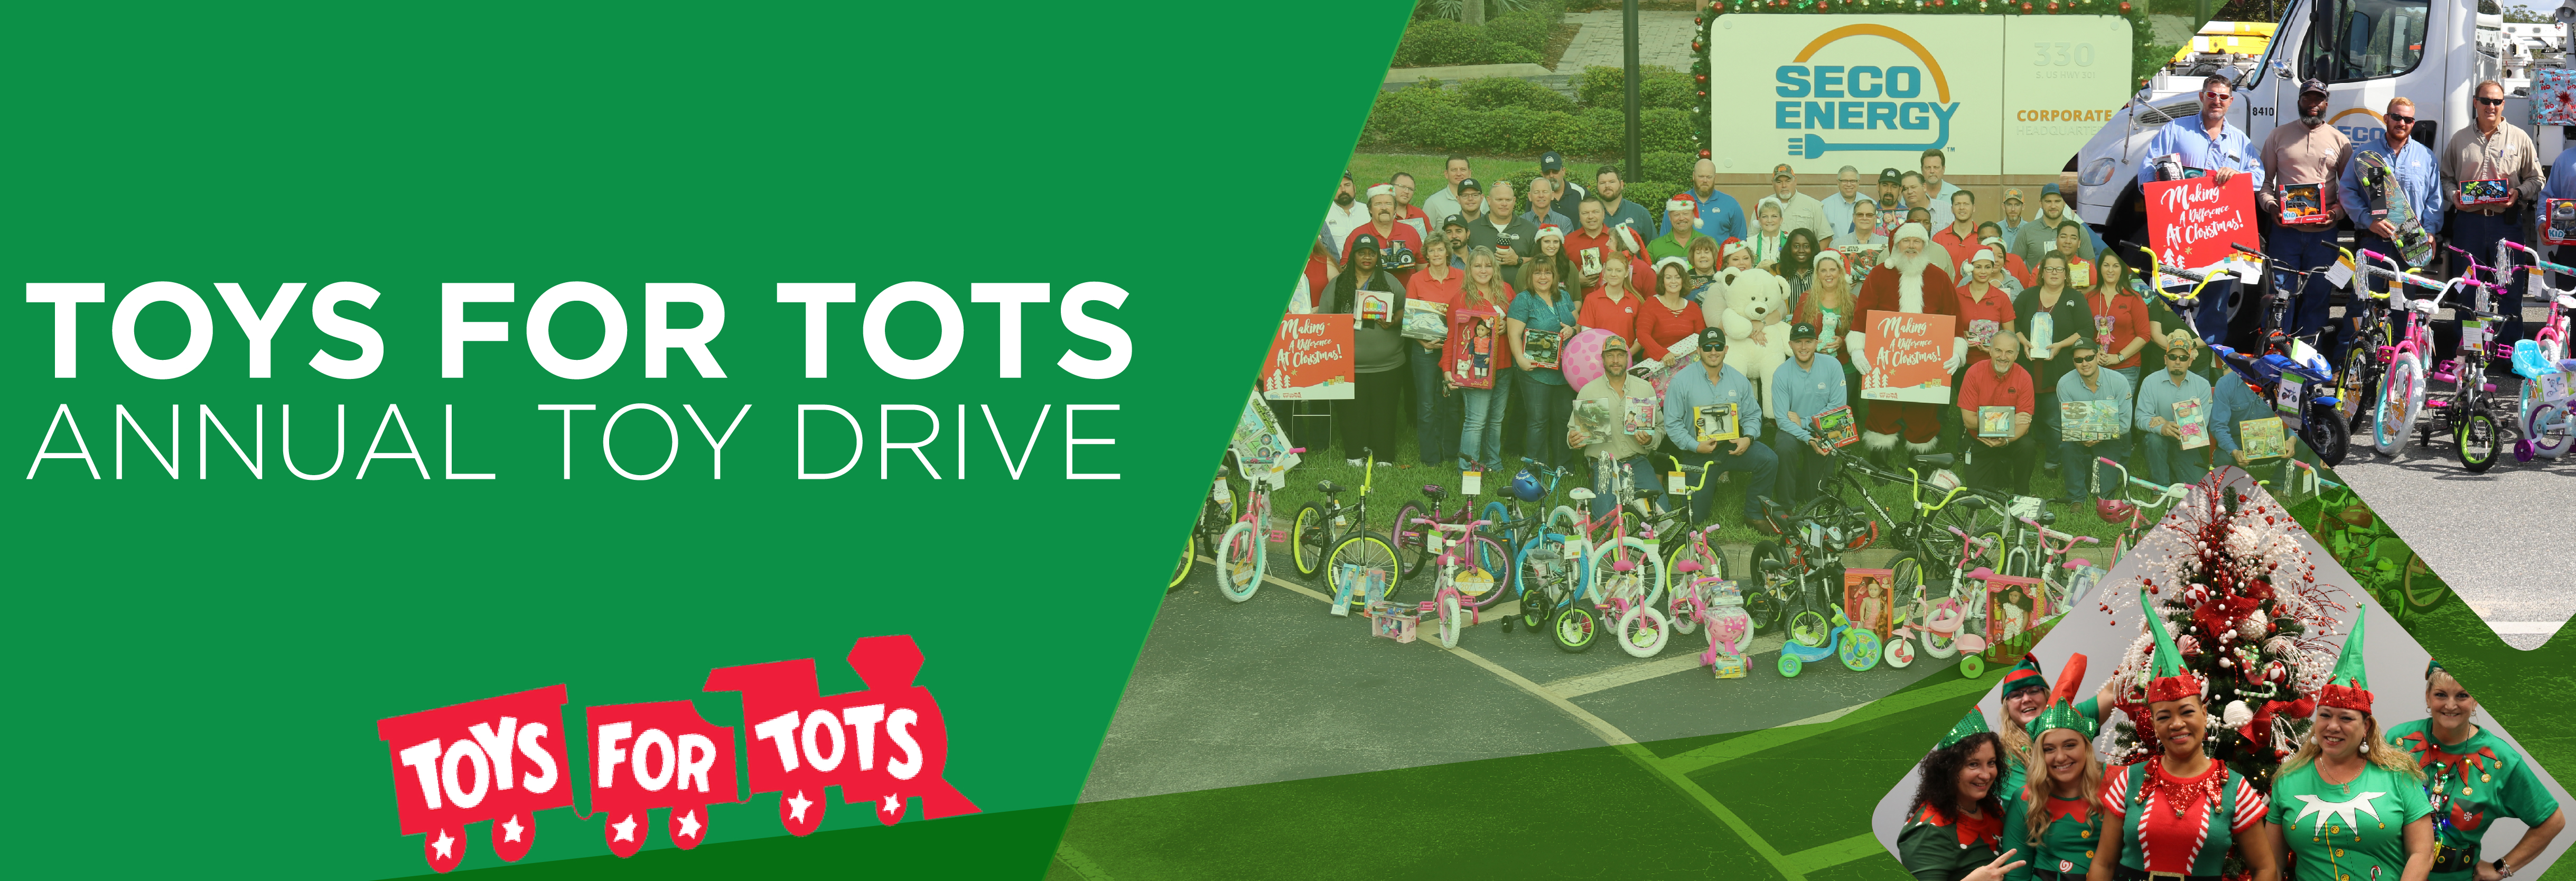 December 2019 SECO News Toys for Tots drive